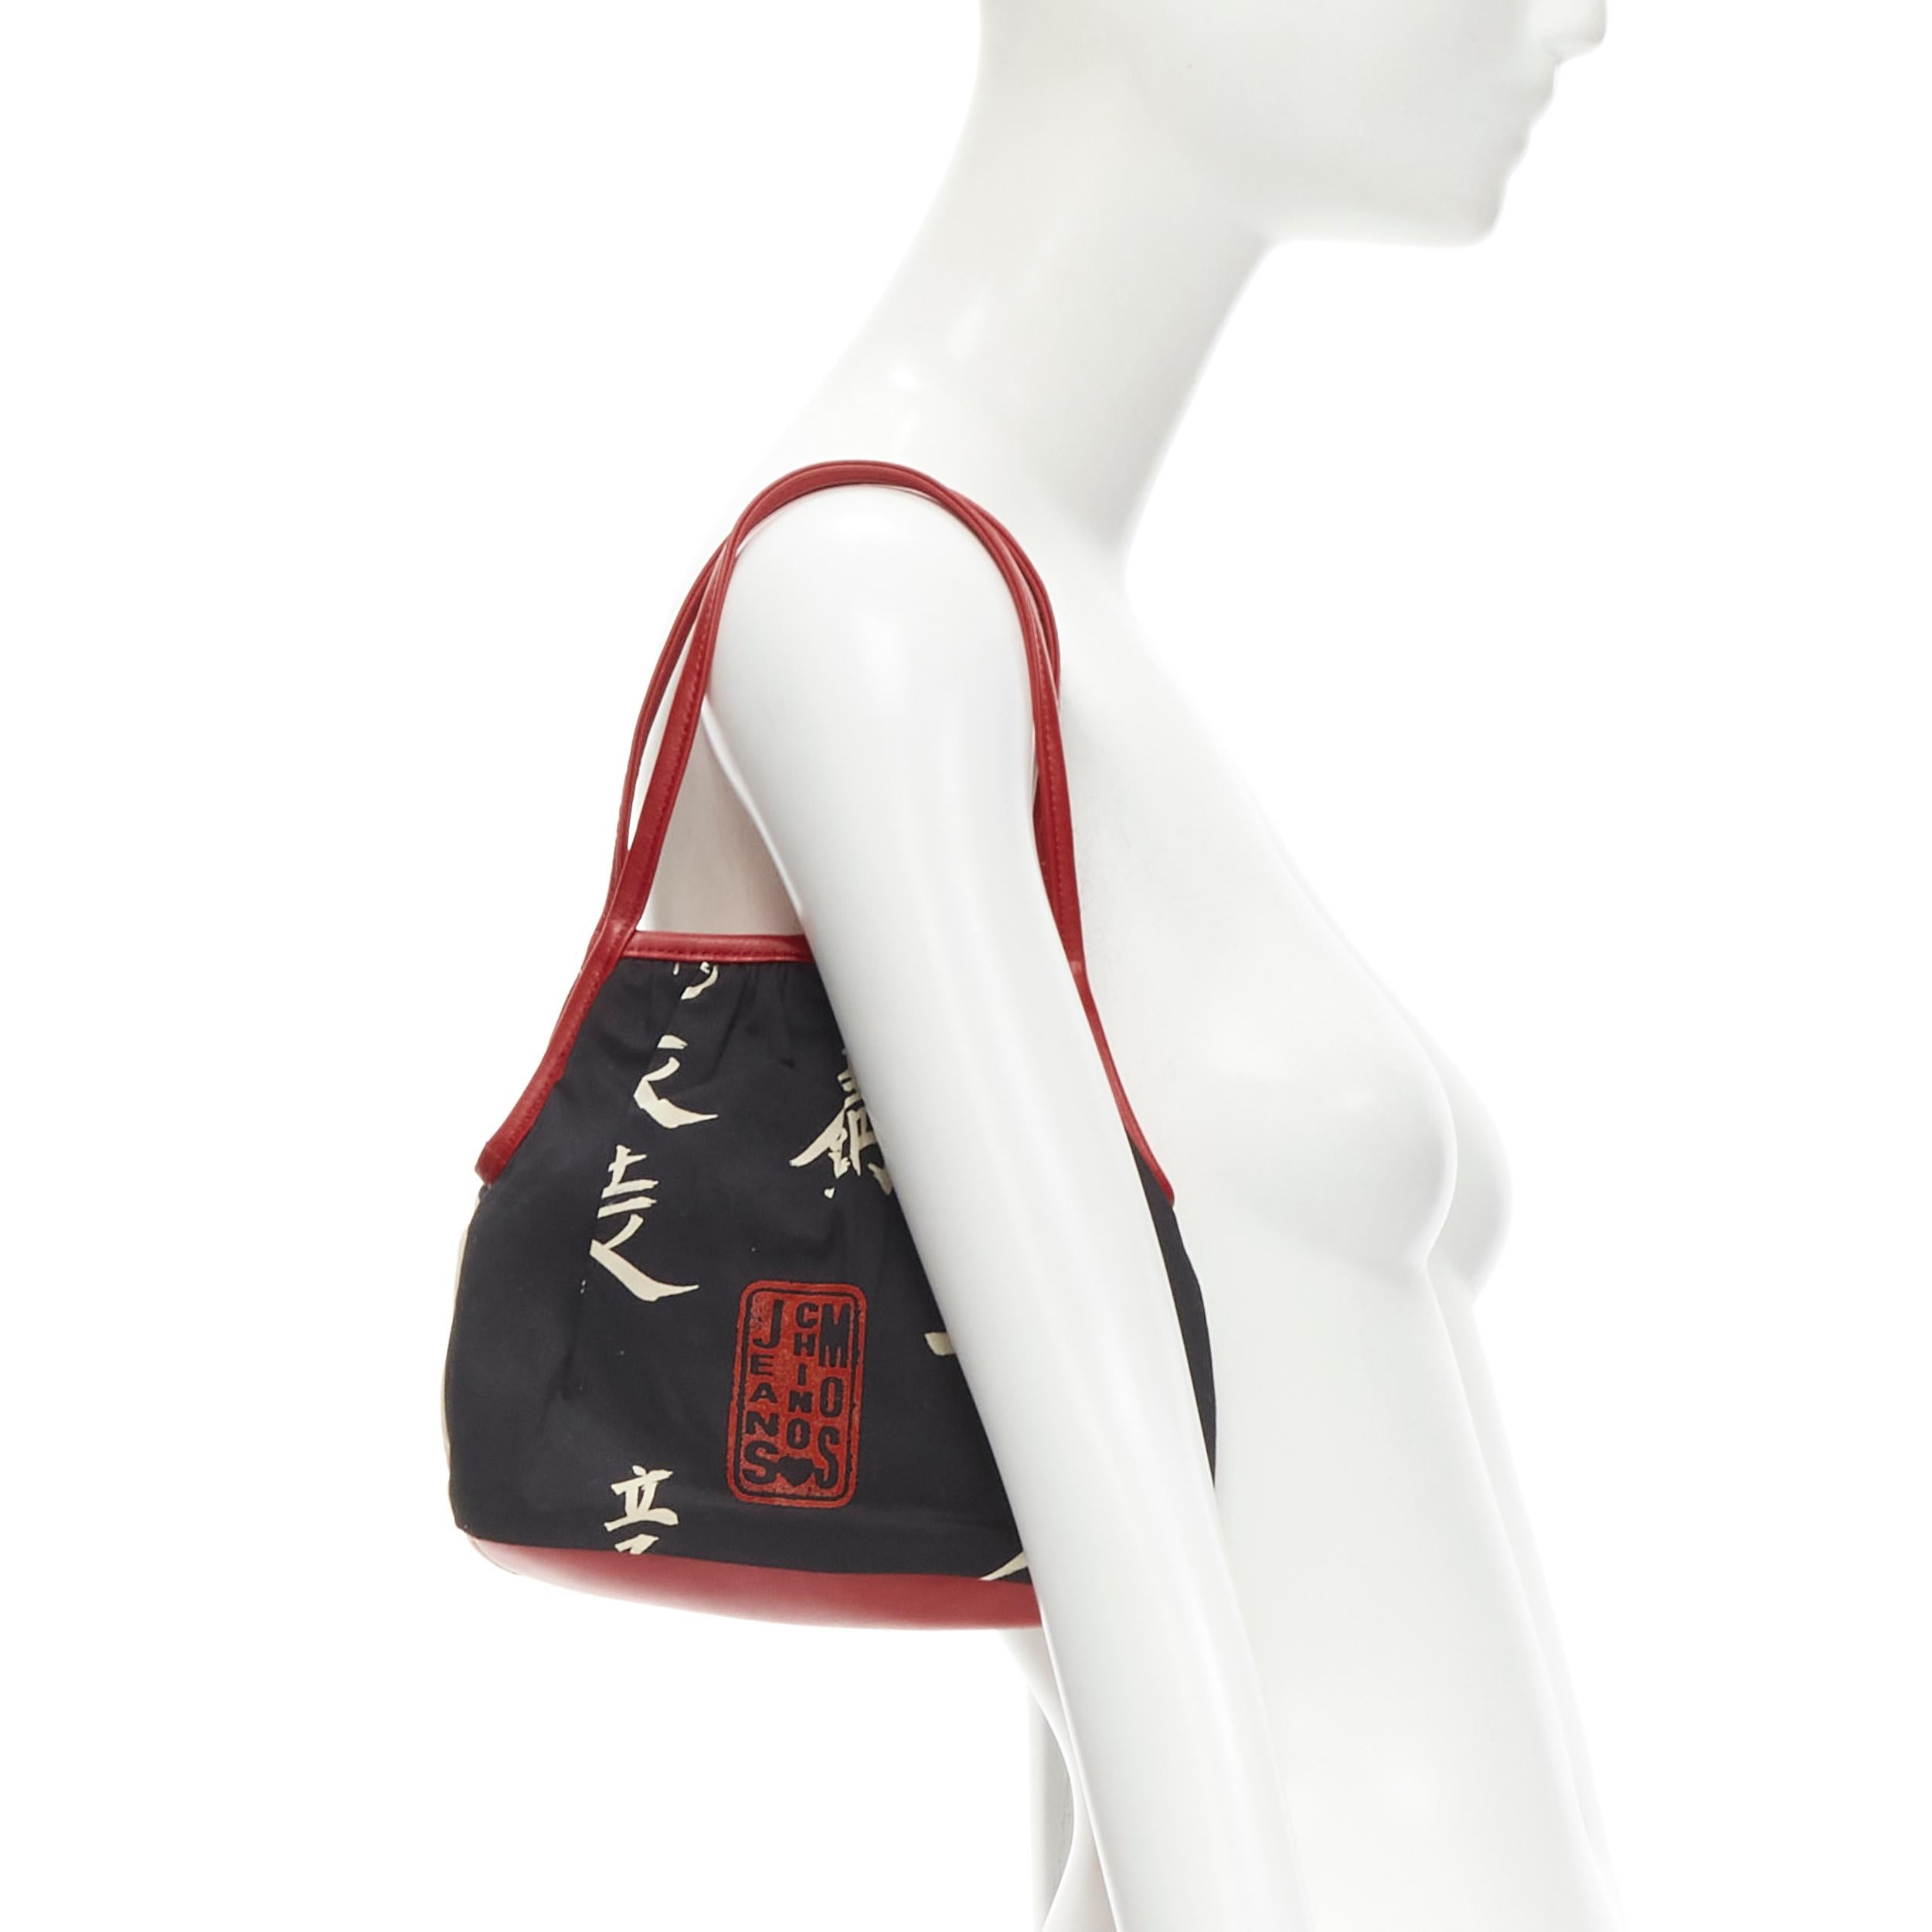 new MOSCHINO Cheap Chic Japonais print cotton red leather trim bag
Brand: Moschino
Designer: Jeremy Scott
Material: Cotton
Color: Black
Pattern: Abstract
Closure: Magnet
Extra Detail: Leather trim top handle.
Made in: Italy

CONDITION:
Condition: